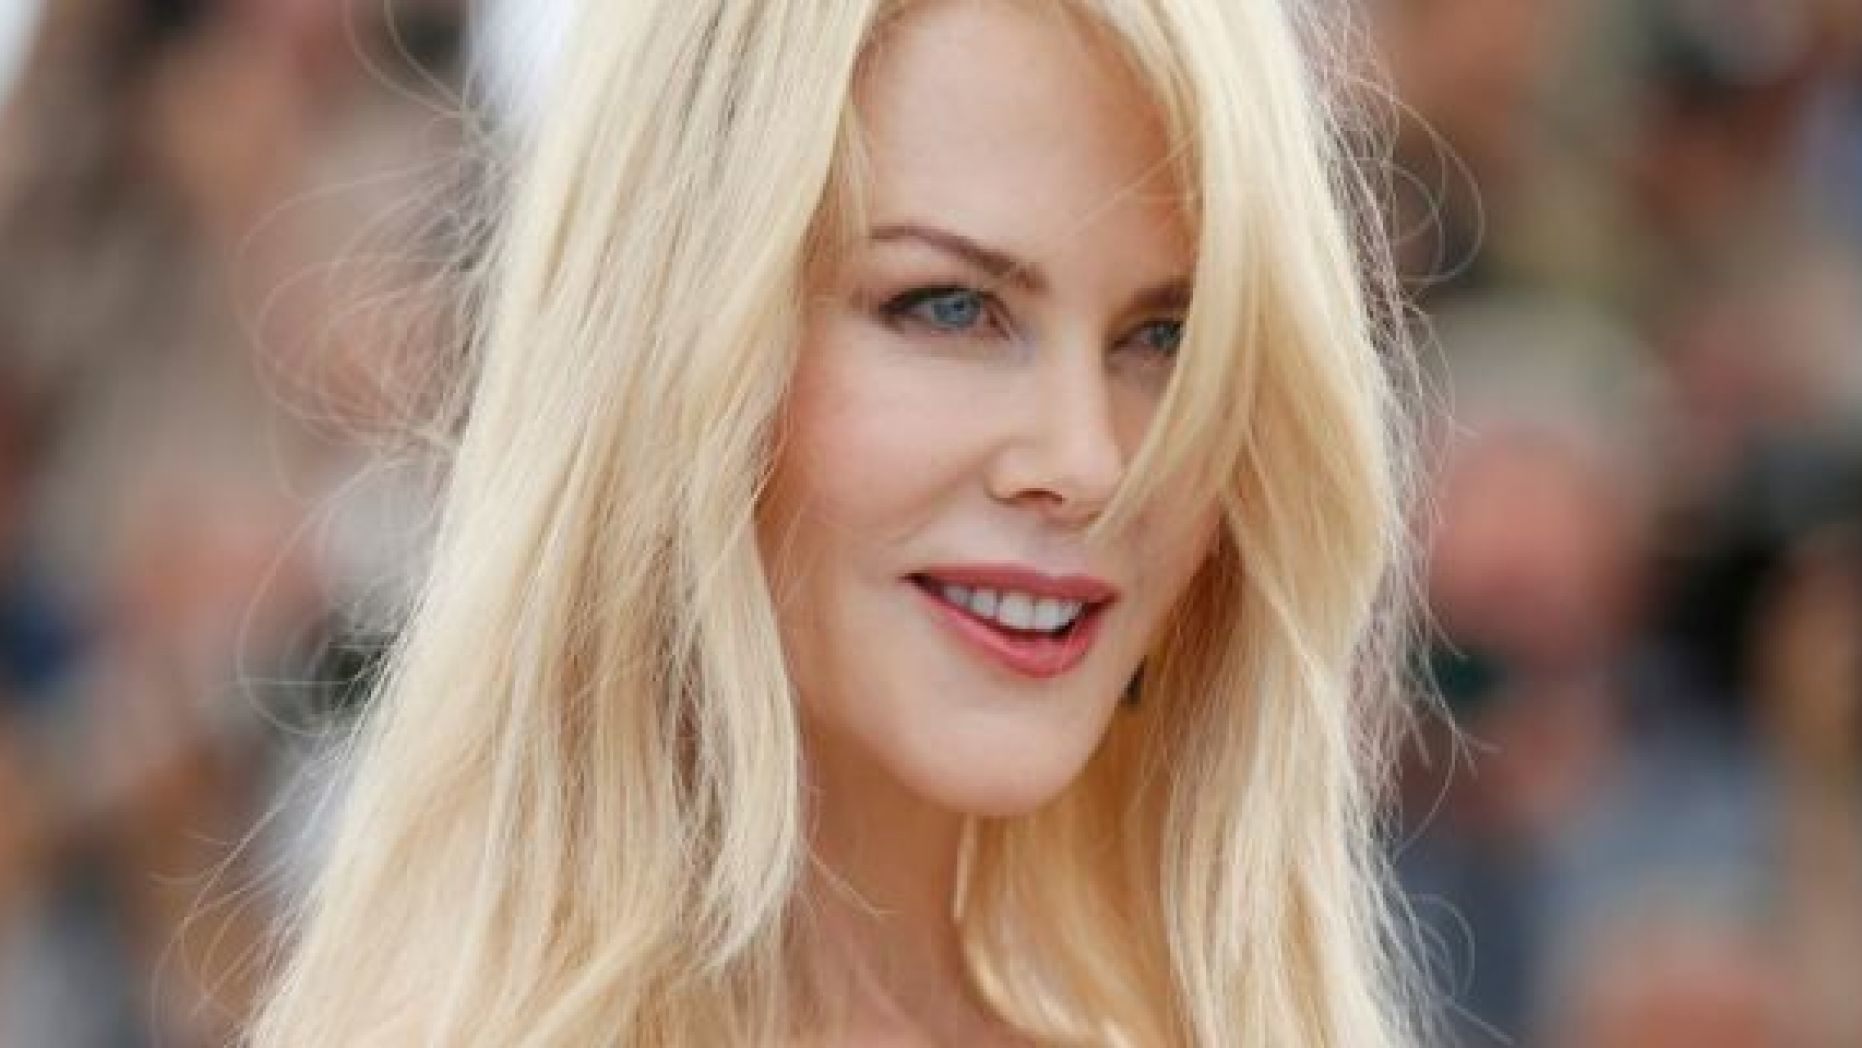 Actress Nicole Kidman had an active shooter scare on the set of a movie.